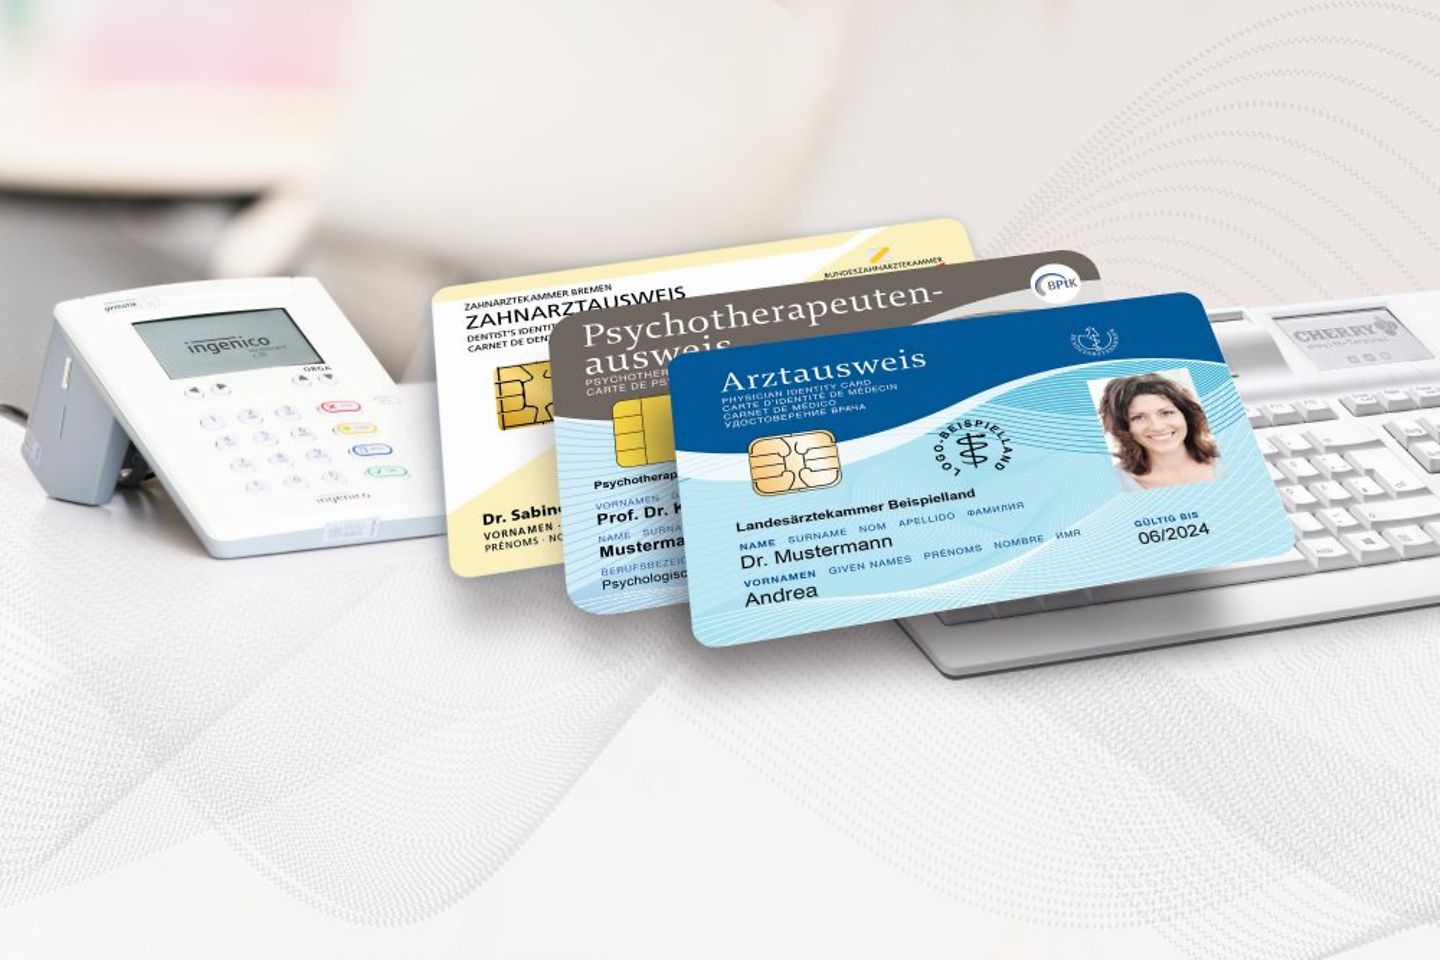 eHBA Cards for healthcare professionals with card reader